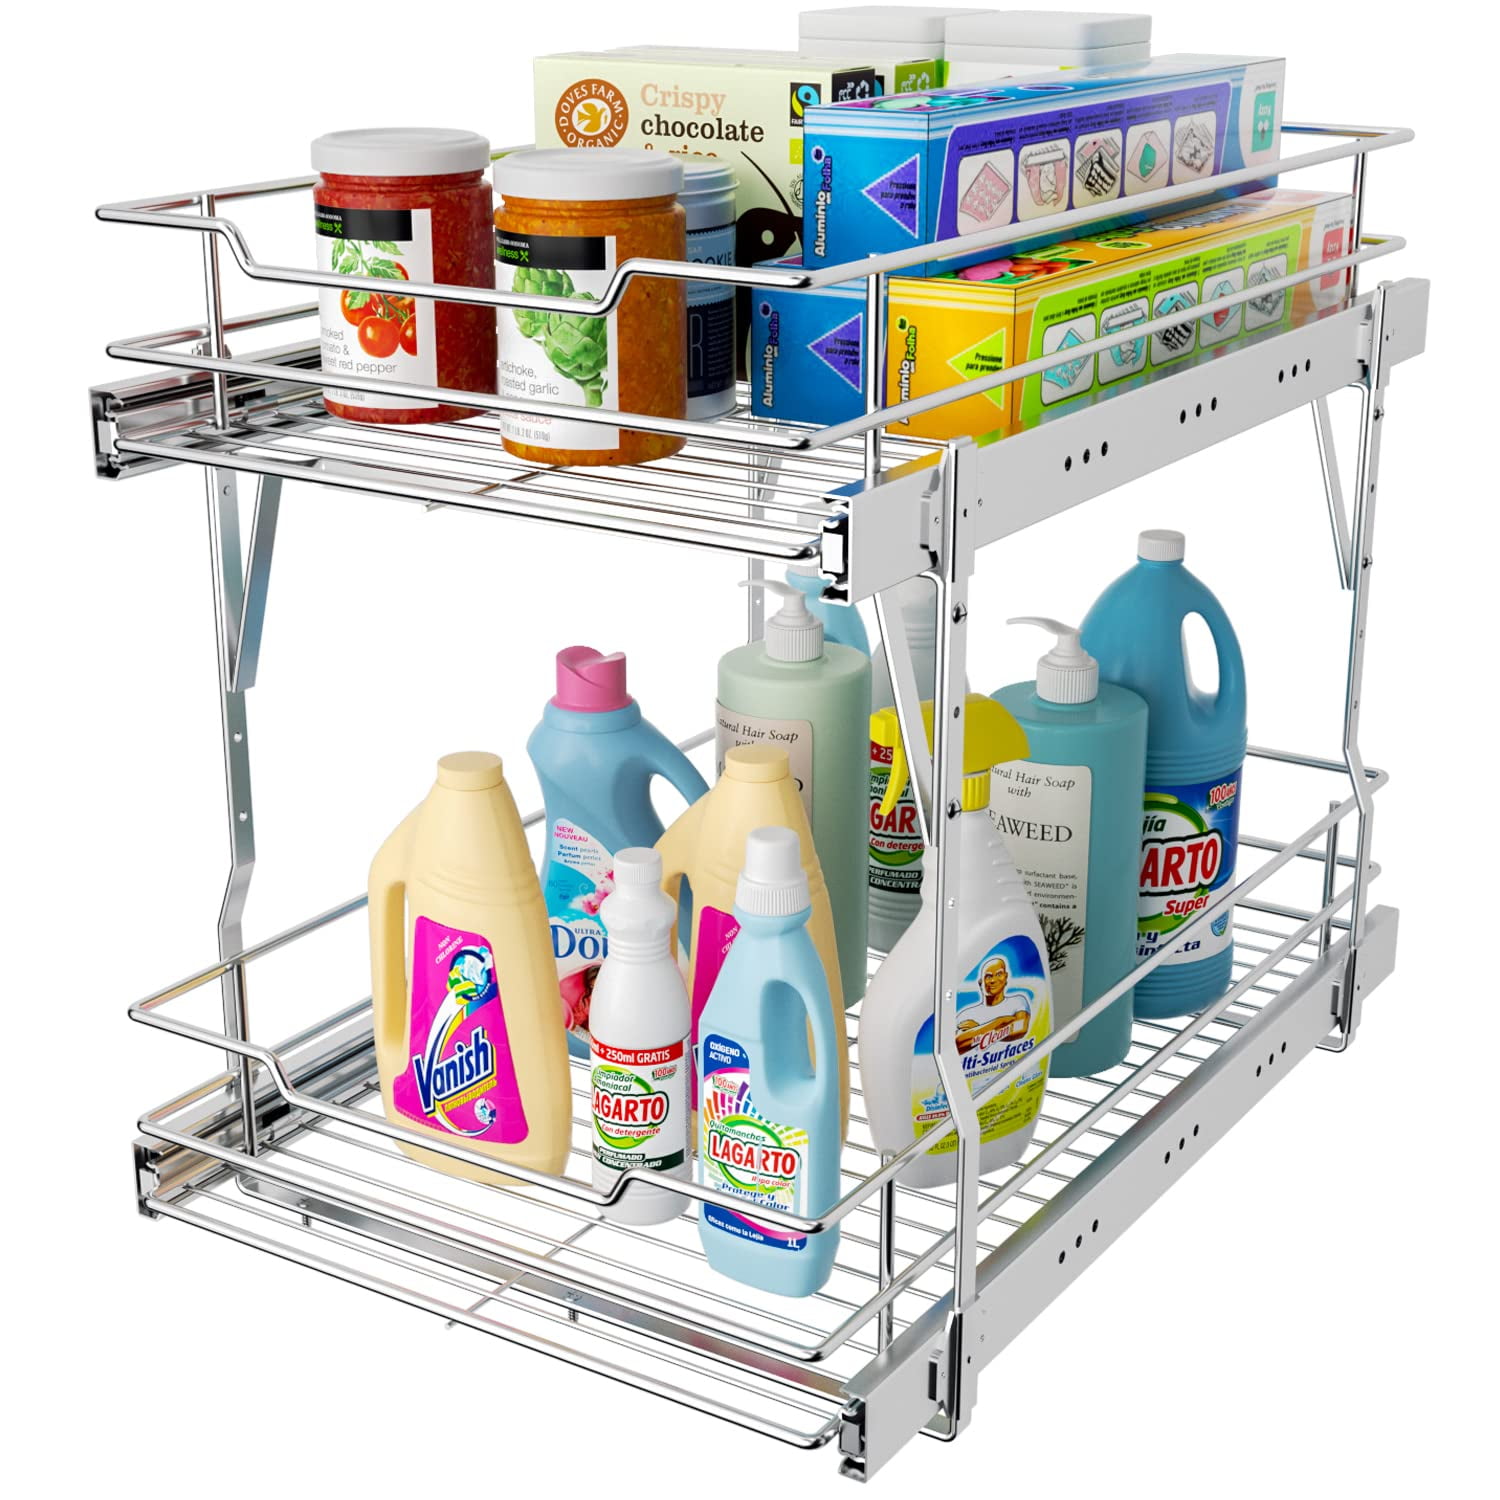  LOVMOR Under Sink Organizers and Storage 22½” W x 21” D, 2  Tier Pull Out Cabinet Organizer with Soft Close, Adjustable Multi-Purpose  Under Sink Organizer for Bathroom Kitchen(Left)